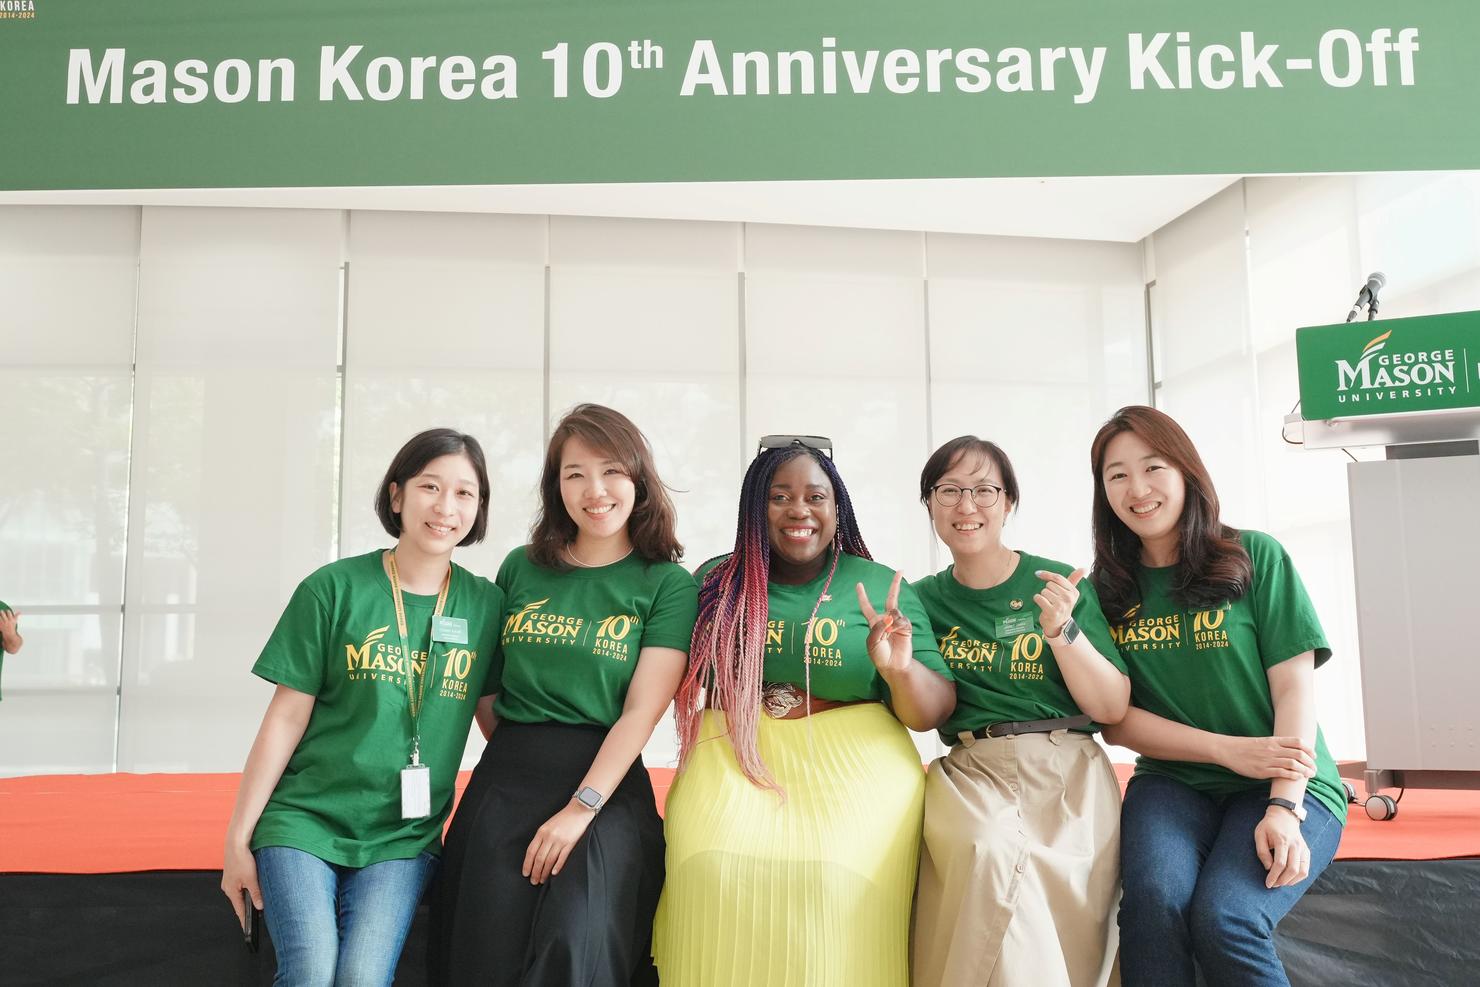 Attendees gather together for a photo at the Mason Korea celebration